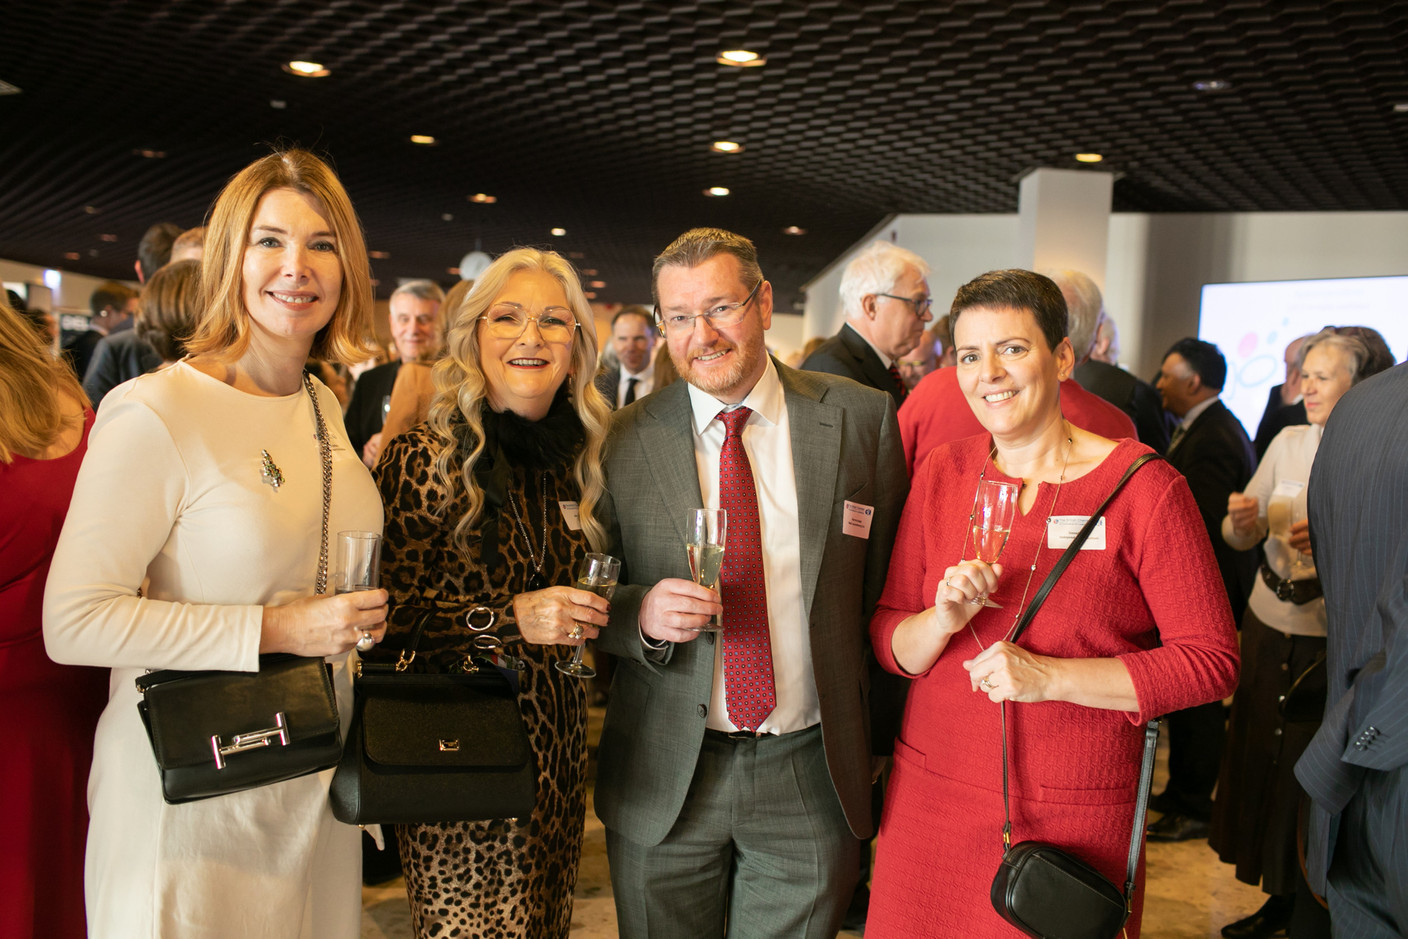 Rebecca Jackson of Bank of New York Mellon (on left), Darren Judge of M&G Luxembourg (second from right), and Sinead Lyons, an independent consultant (on right). Photo: Matic Zorman / Maison Moderne